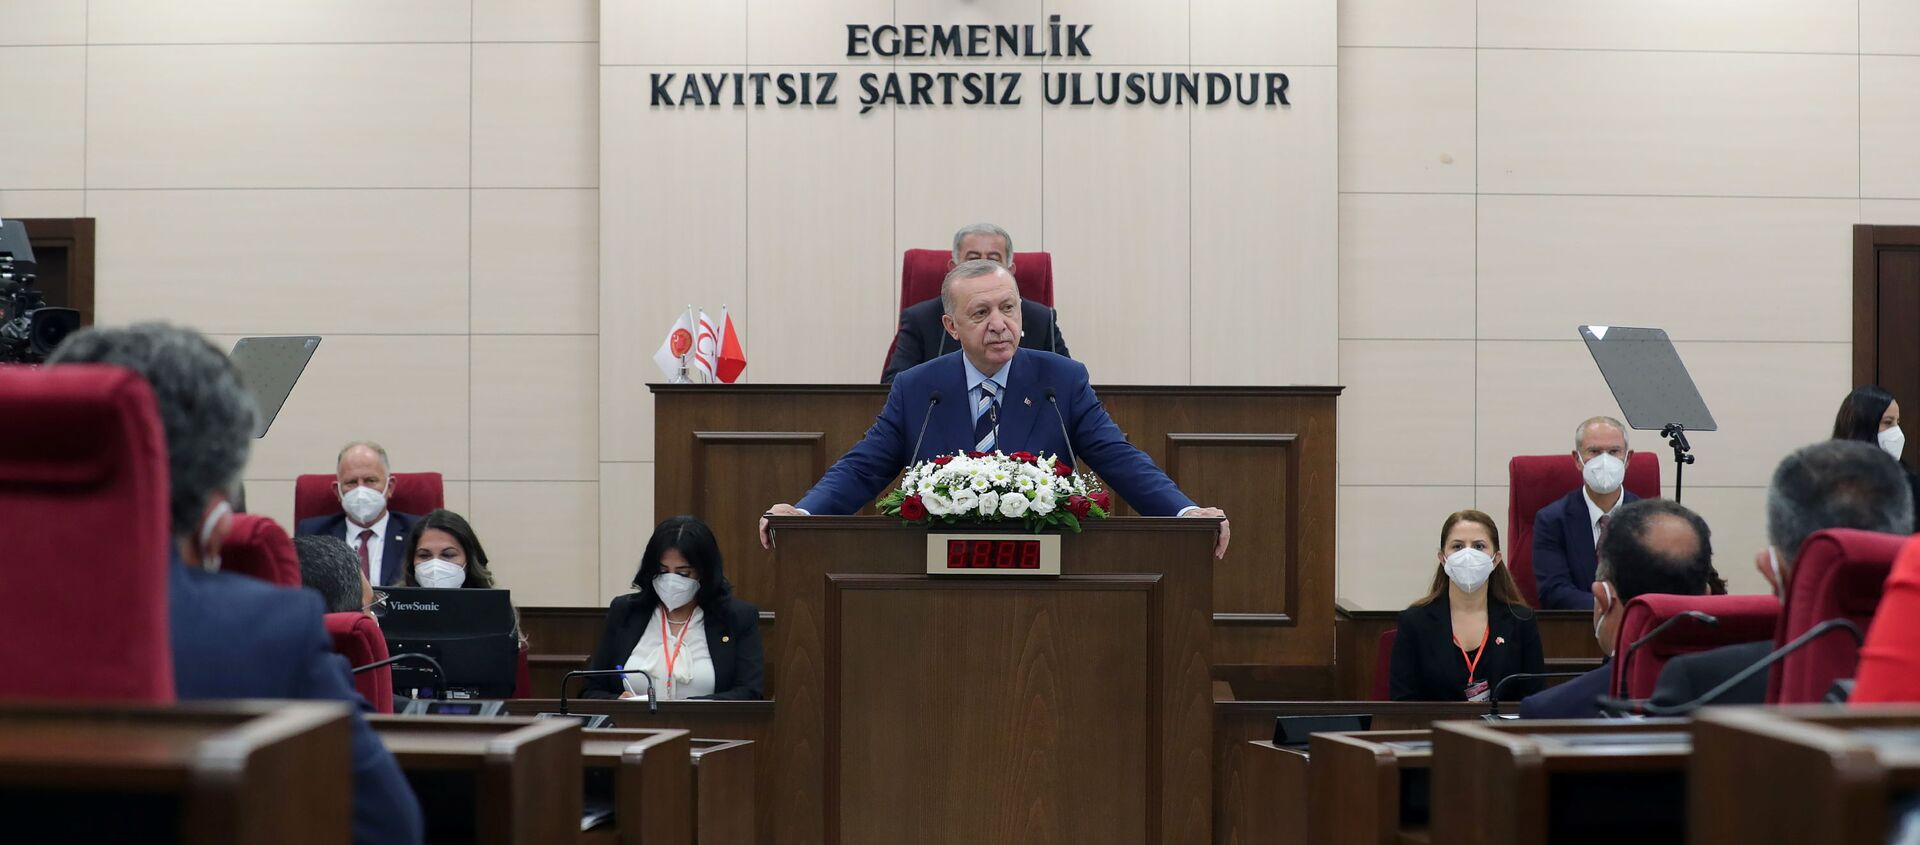 Turkish President Tayyip Erdogan addresses the members of the parliament of Turkish Republic of Northern Cyprus, a breakway state recognized only by Turkey, in northern Nicosia, Cyprus July 19, 2021. - Sputnik International, 1920, 21.07.2021